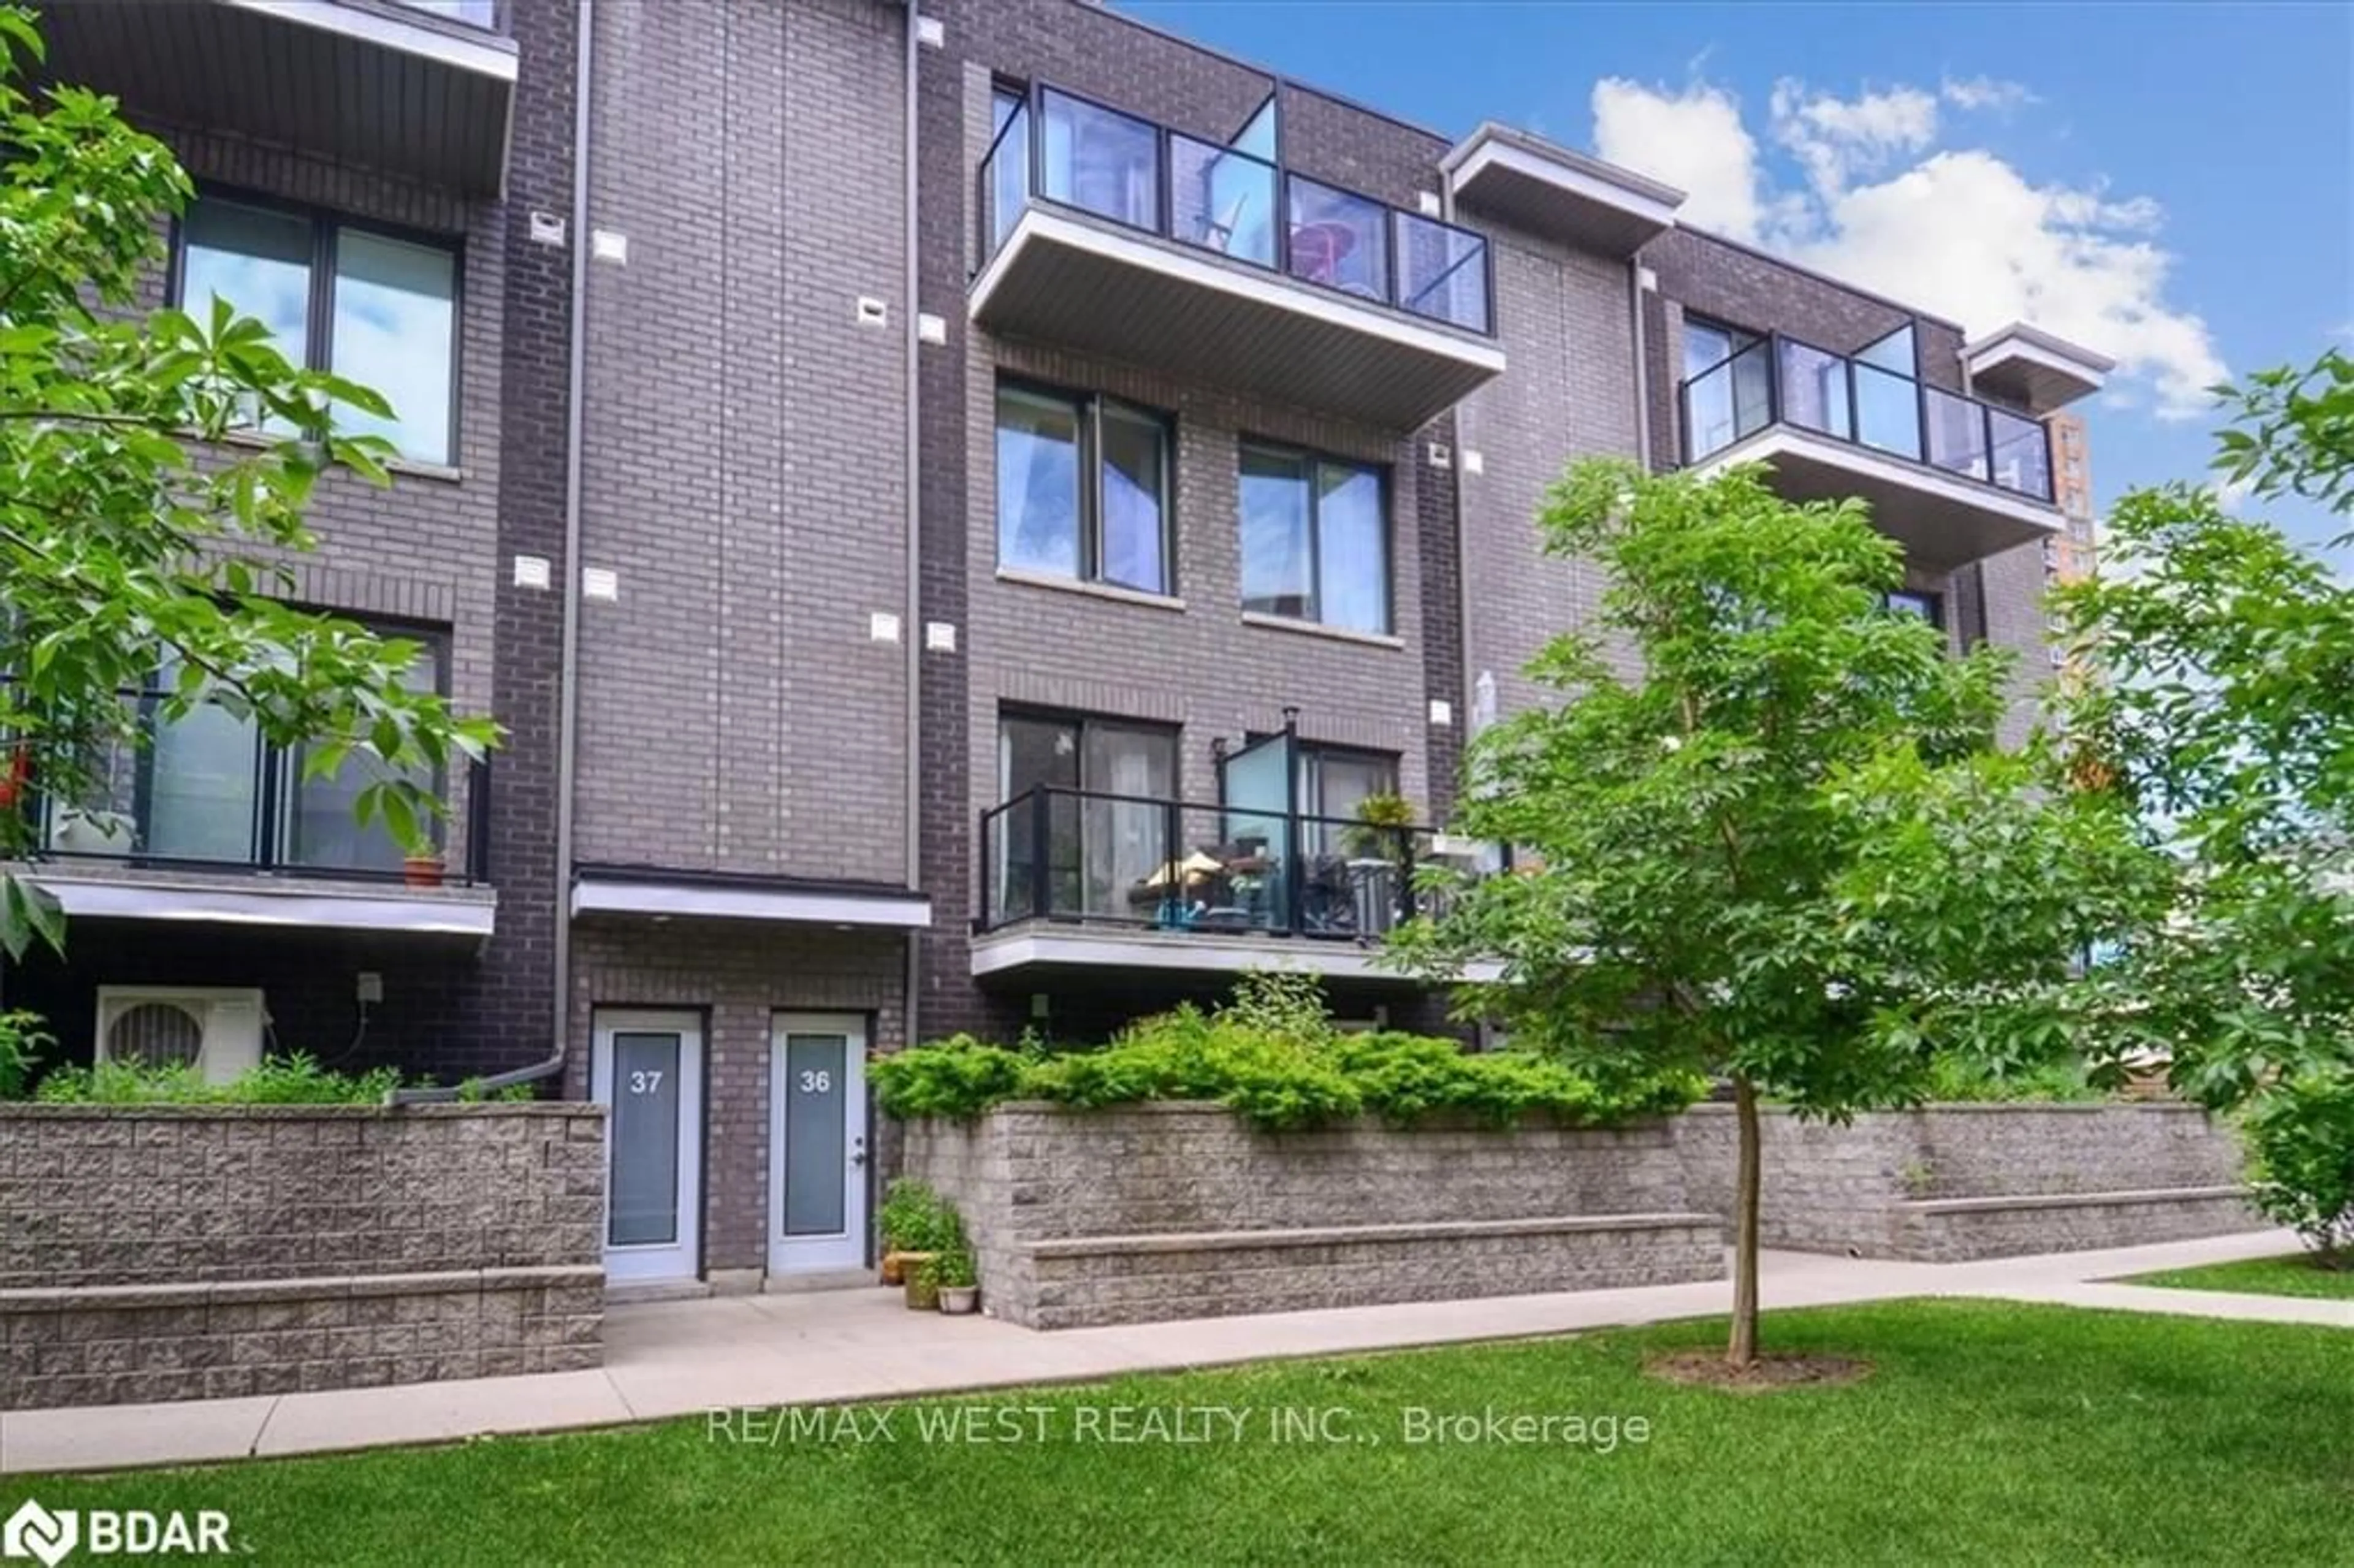 A pic from exterior of the house or condo for 2059 Weston Rd #36, Toronto Ontario N9N 1X7